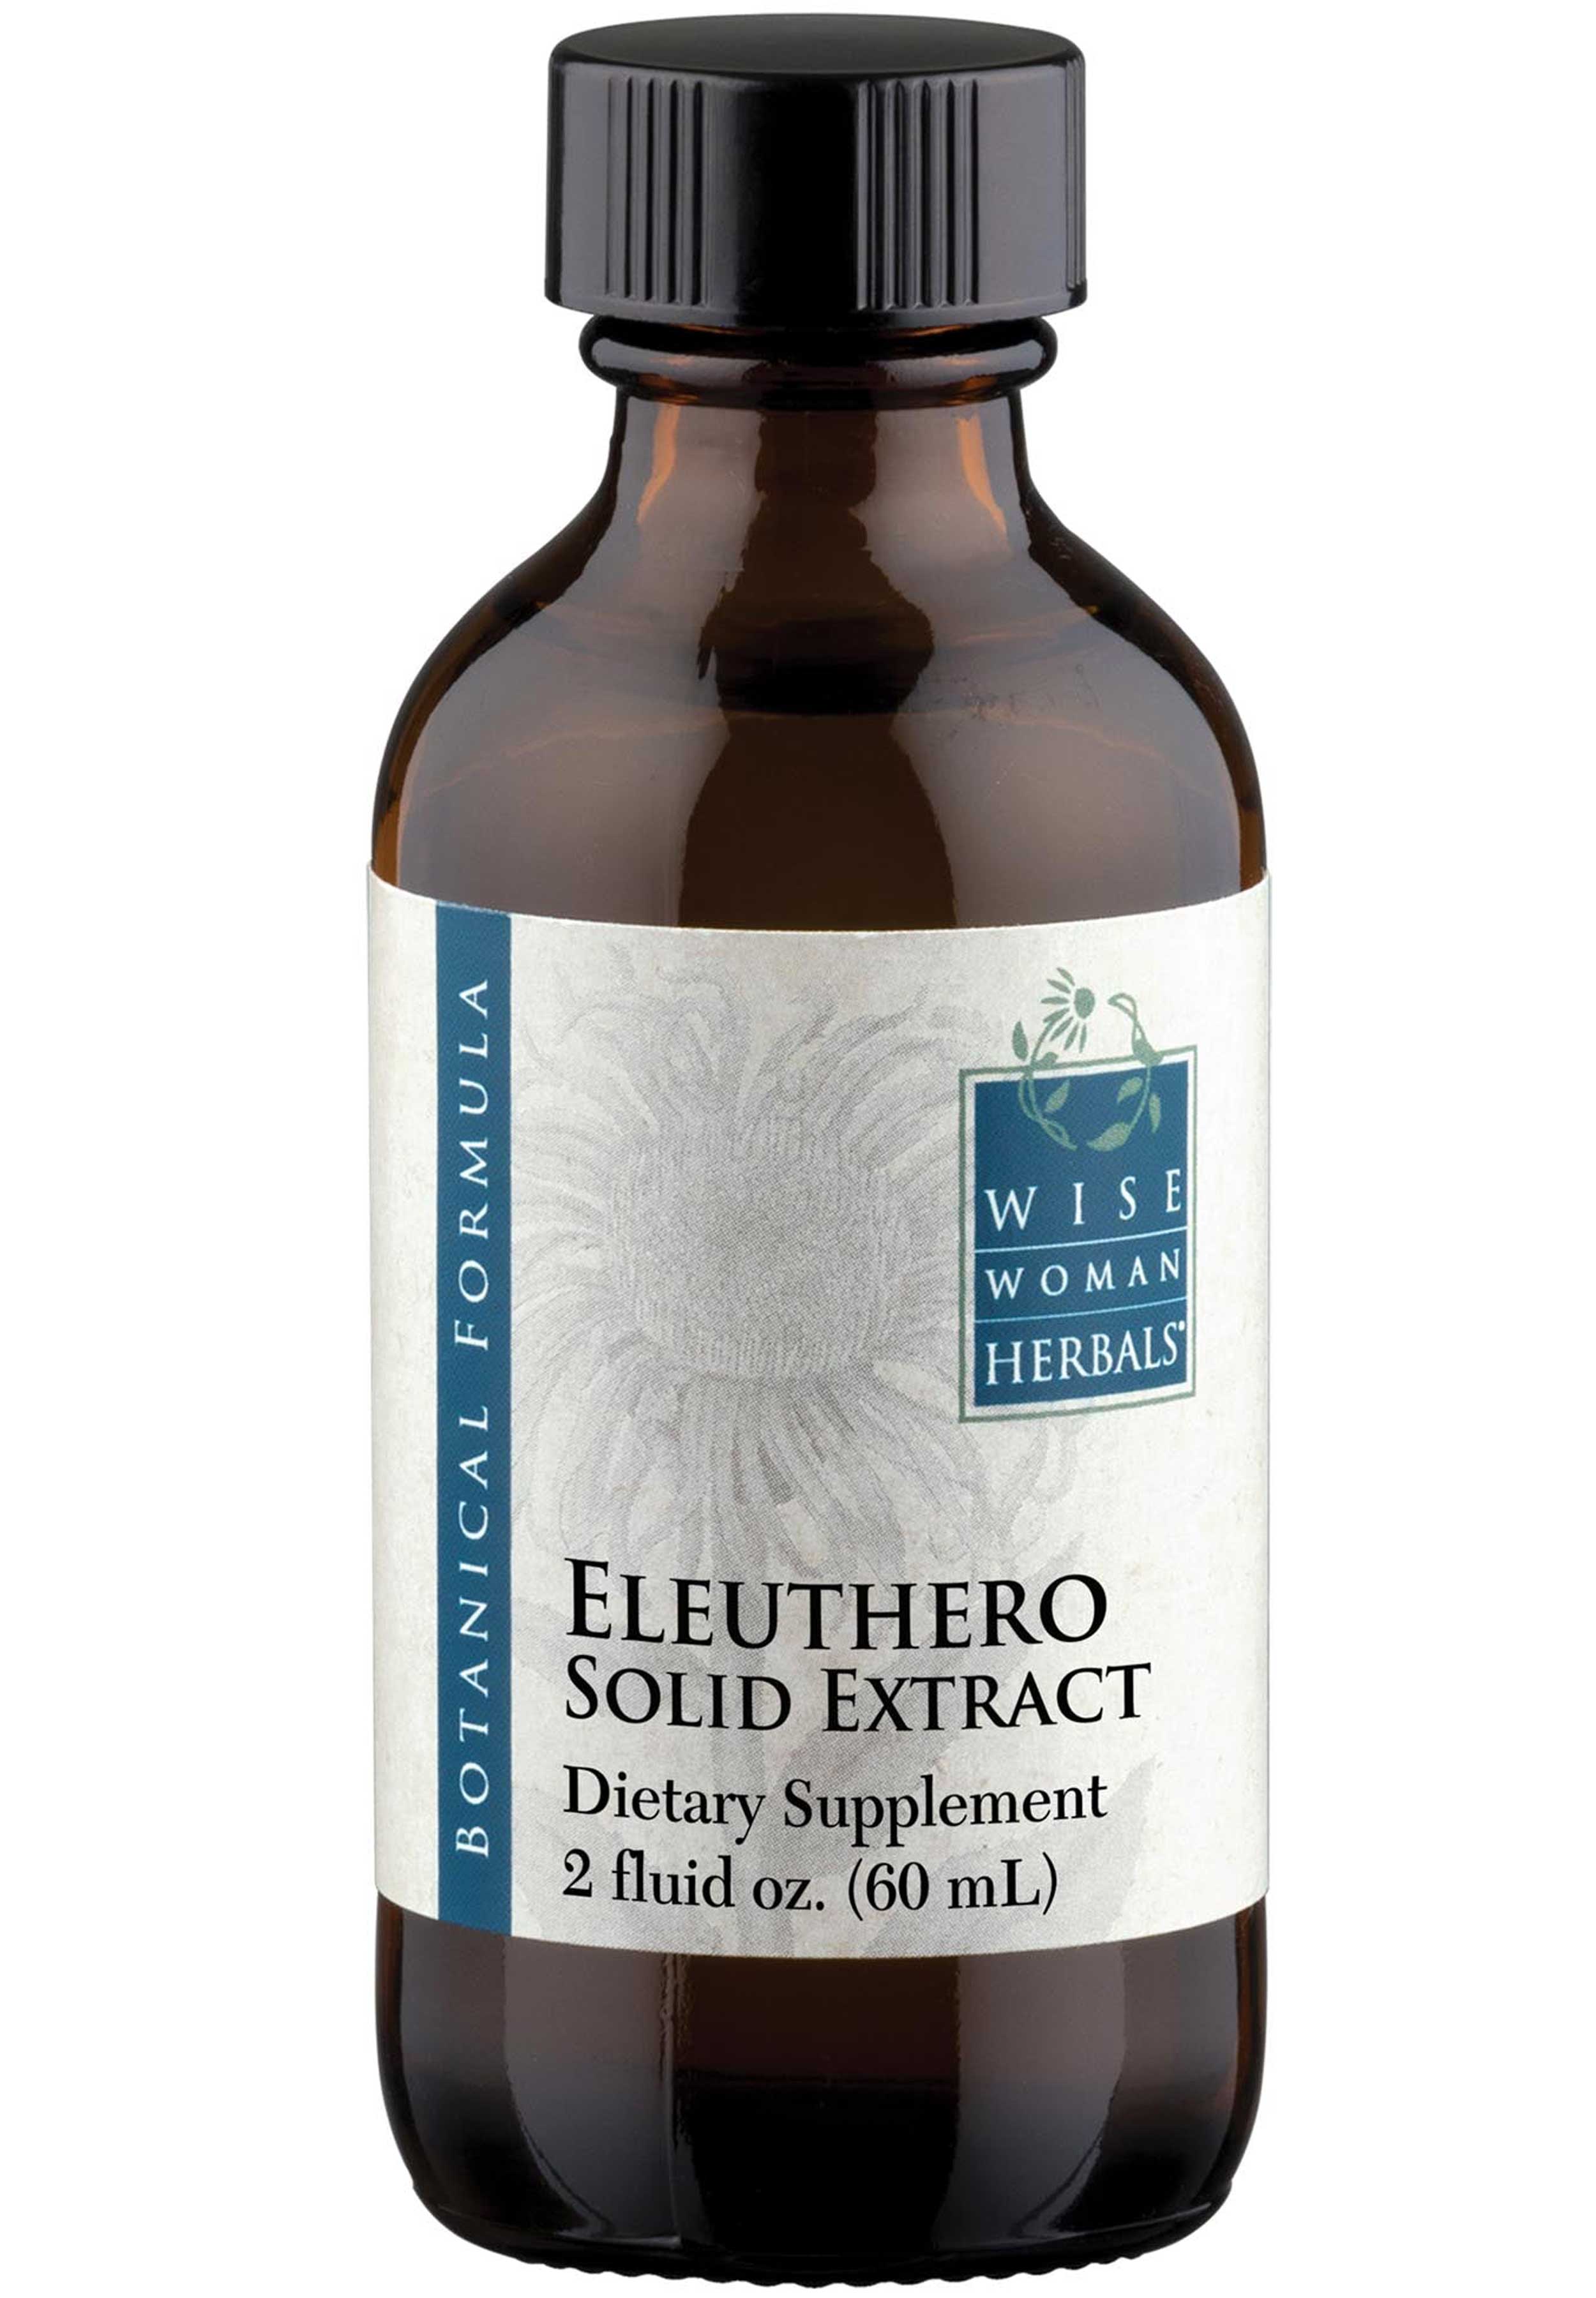 Wise Woman Herbals Eleuthero Solid Extract